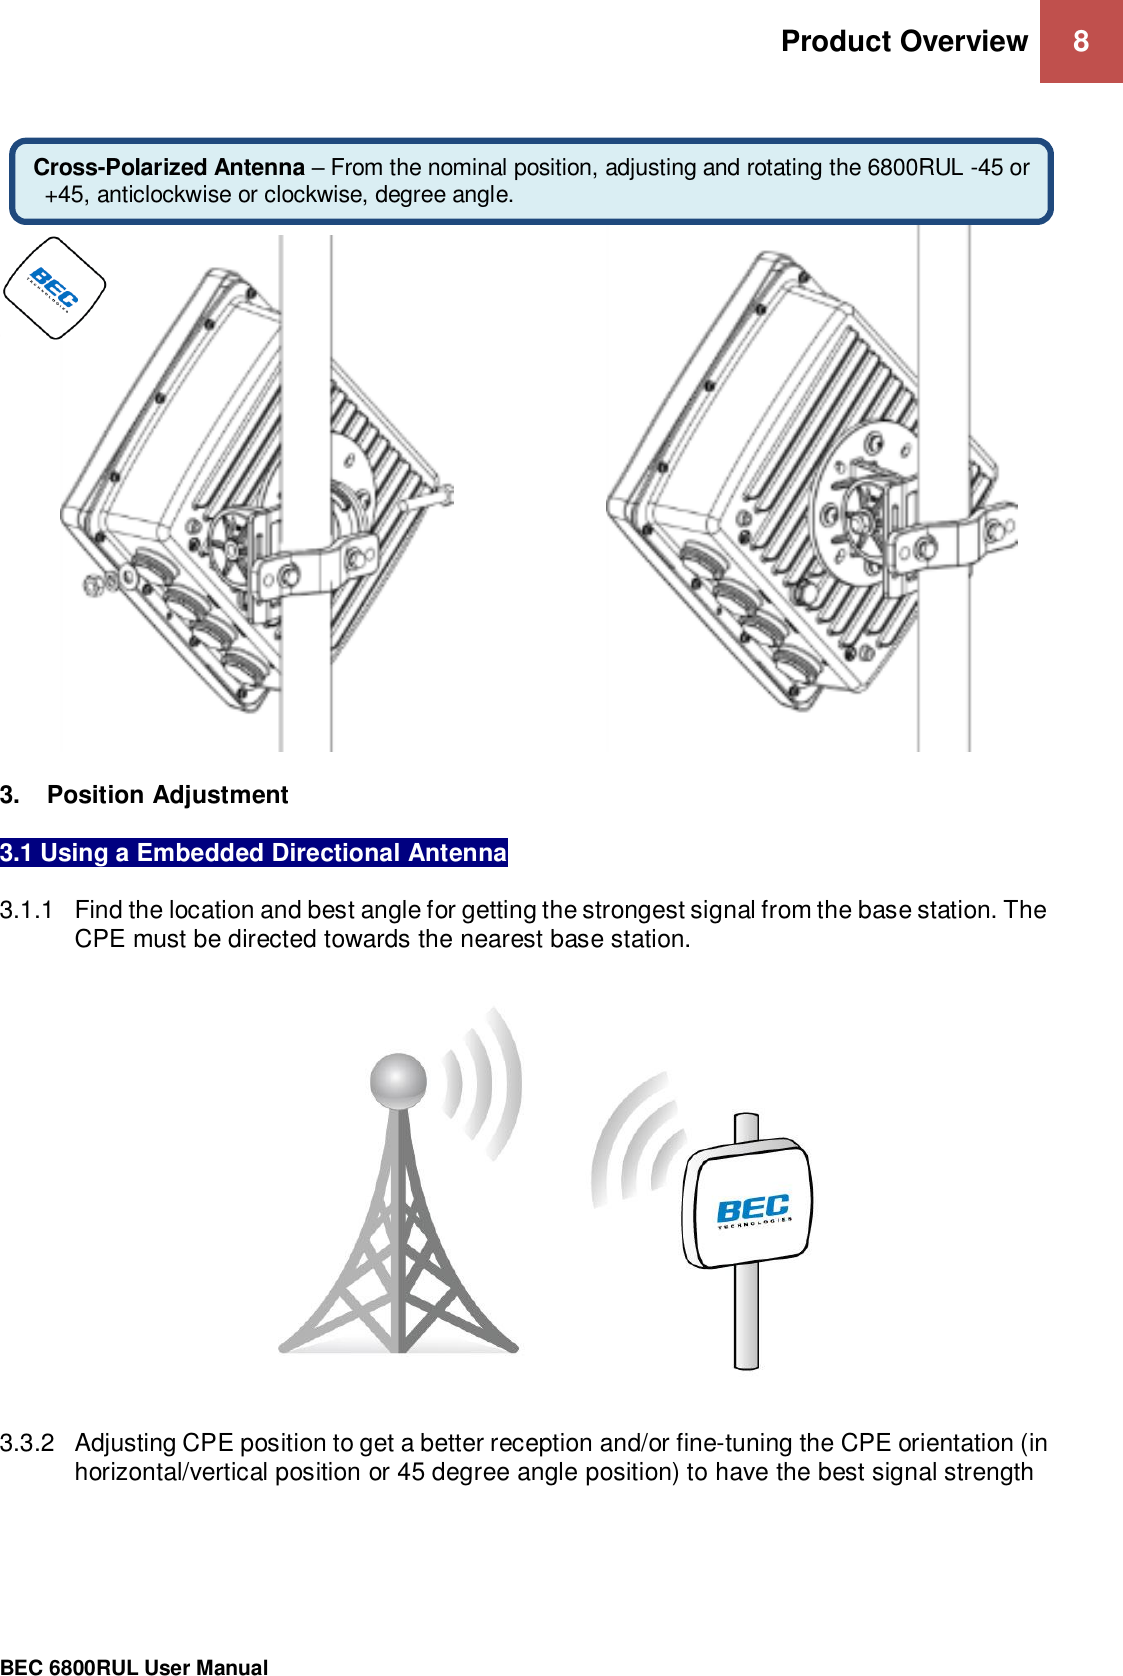 Product Overview 8                                                 BEC 6800RUL User Manual           3.  Position Adjustment   3.1 Using a Embedded Directional Antenna  3.1.1  Find the location and best angle for getting the strongest signal from the base station. The CPE must be directed towards the nearest base station.      3.3.2  Adjusting CPE position to get a better reception and/or fine-tuning the CPE orientation (in horizontal/vertical position or 45 degree angle position) to have the best signal strength            Cross-Polarized Antenna – From the nominal position, adjusting and rotating the 6800RUL -45 or +45, anticlockwise or clockwise, degree angle. 